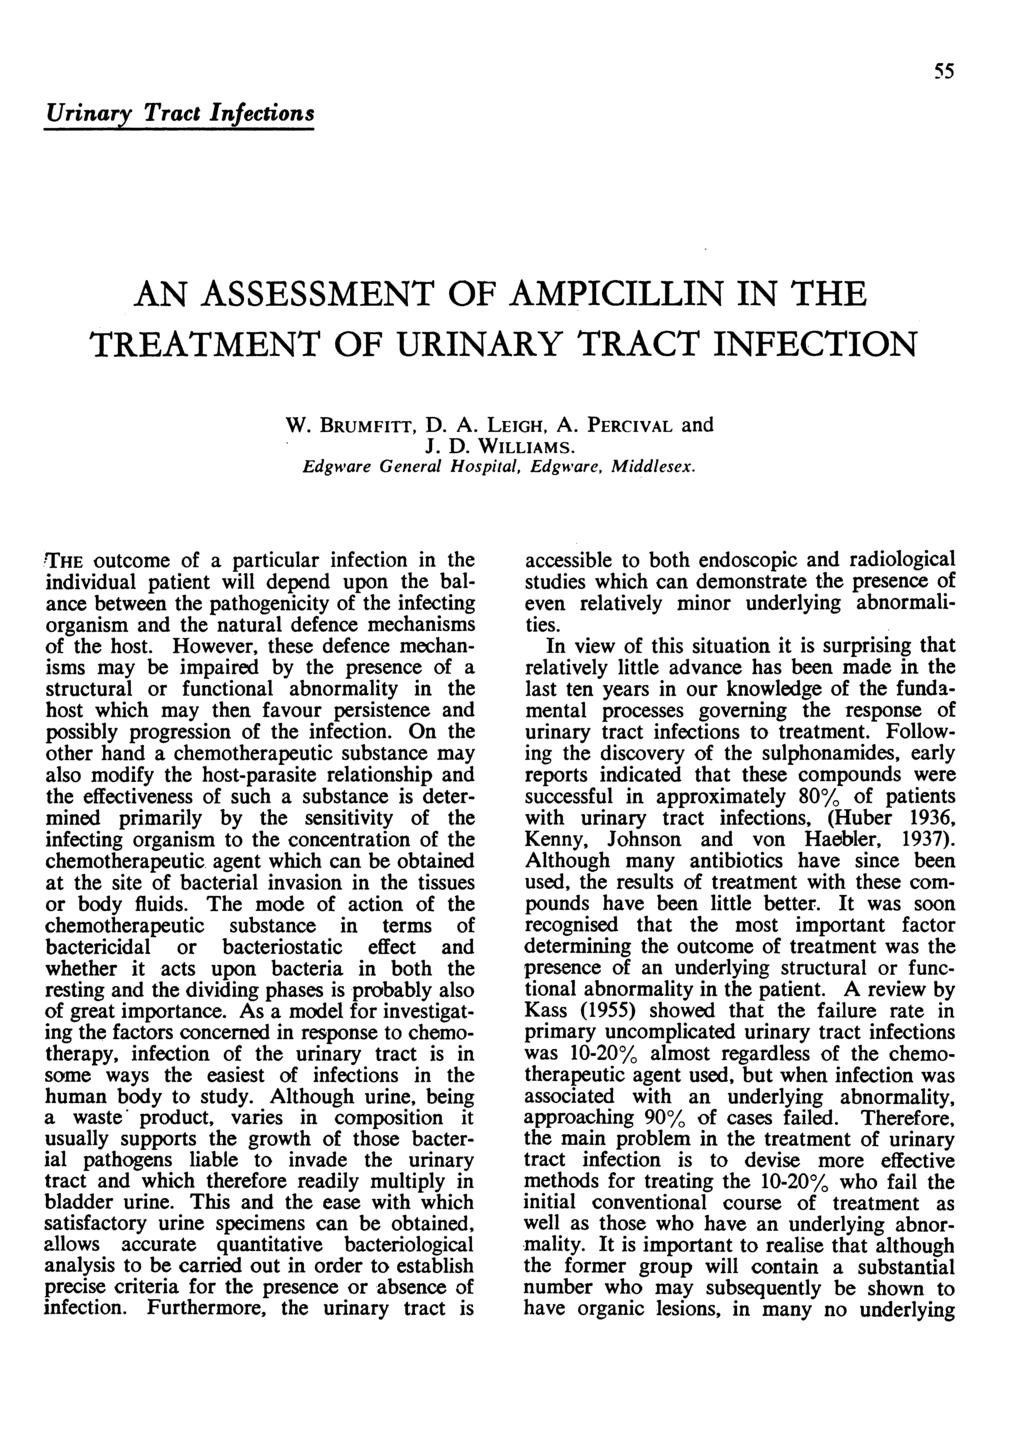 Urinary Tract Infections AN ASSESSMENT OF AMPICILLIN IN THE TREATMENT OF URINARY TRACT INFECTION W. BRUMFITT, D. A. LEIGH, A. PERCIVAL and J. D. WILLIAMS. Edgware General Hospital, Edgware, Middlesex.